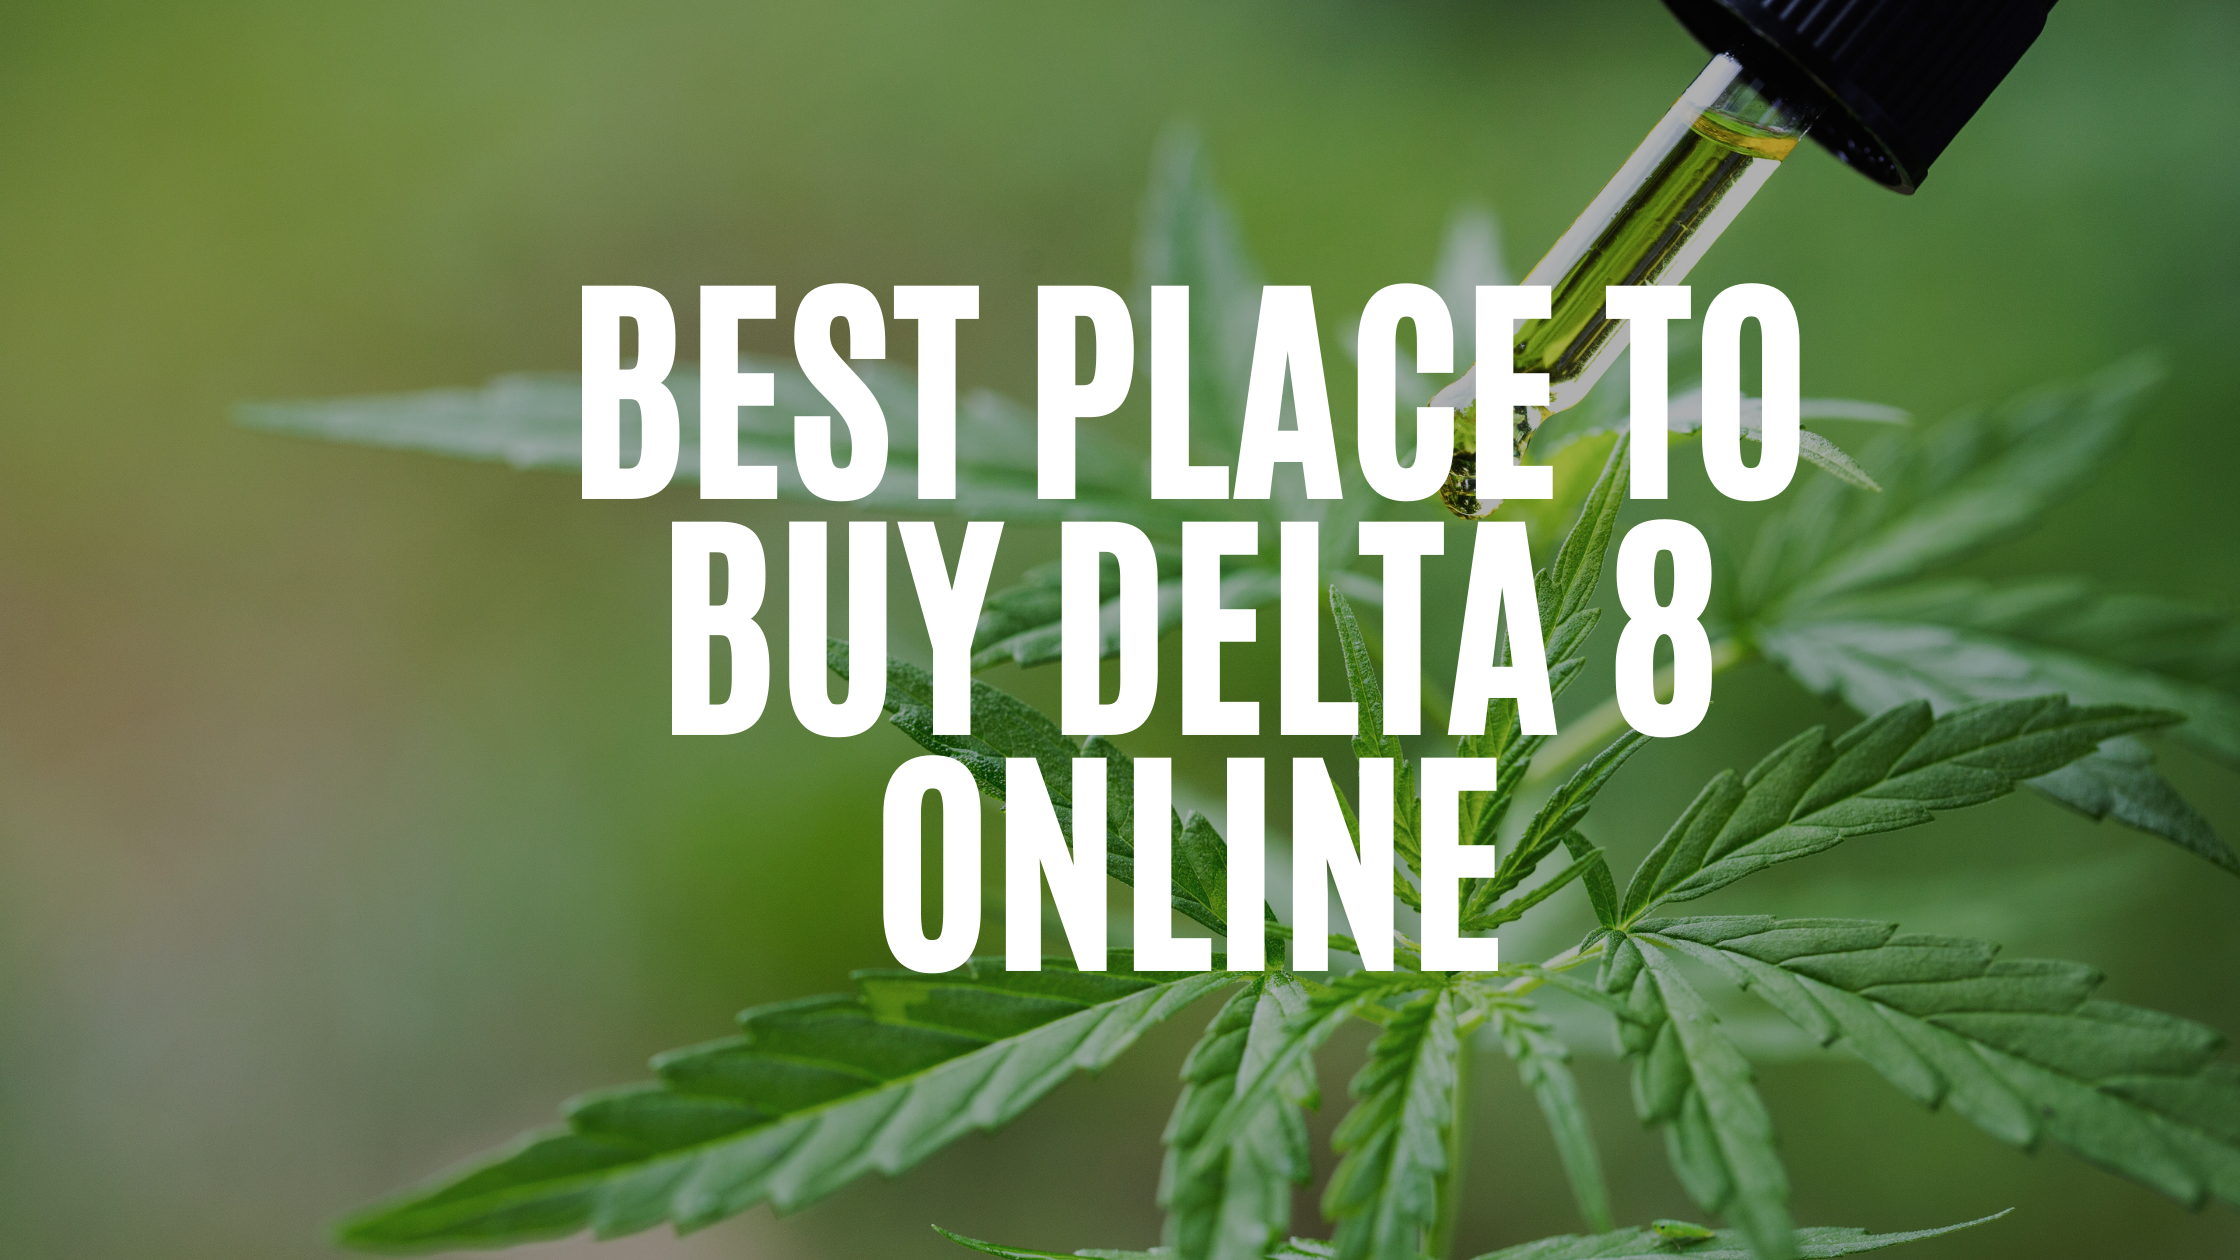 Best Place to Buy Delta 8 Online